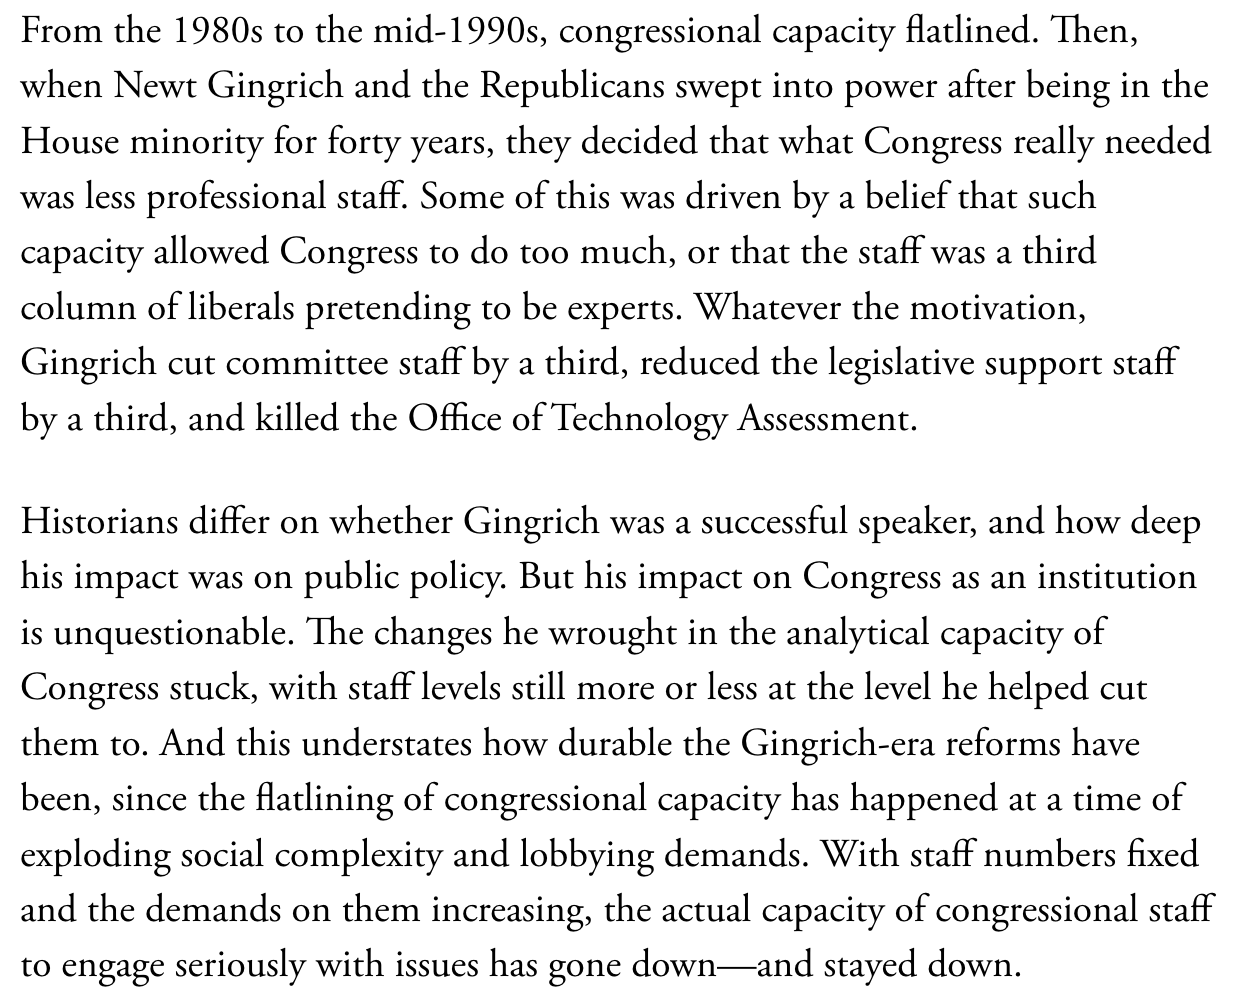 Text:

From the 1980s to the mid-1990s, congressional capacity flatlined. Then, when Newt Gingrich and the Republicans swept into power after being in the House minority for forty years, they decided that what Congtess really needed was less professional staff. Some of this was driven by a belief that such capacity allowed Congress to do too much, or that the staff was a third column of liberals pretending to be experts. Whatever the motivation, Gingrich cut committee staff by a third, reduced the legislative support staff by a third, and killed the Office of Technology Assessment.

Historians differ on whether Gingrich was a successful speaker, and how deep his impact was on public policy. But his impact on Congress as an institution is unquestionable. The changes he wrought in the analytical capacity of Congress stuck, with staff levels still more or less at the level he helped cut them to. And this understates how durable the Gingrich-era reforms have been, since the flatlining of congressional capacity has happened at a time of exploding social complexity and lobbying demands. With staff numbers fixed and the demands on them increasing, the actual capacity of congressional staff to engage seriously with issues has gone down—and stayed down. 